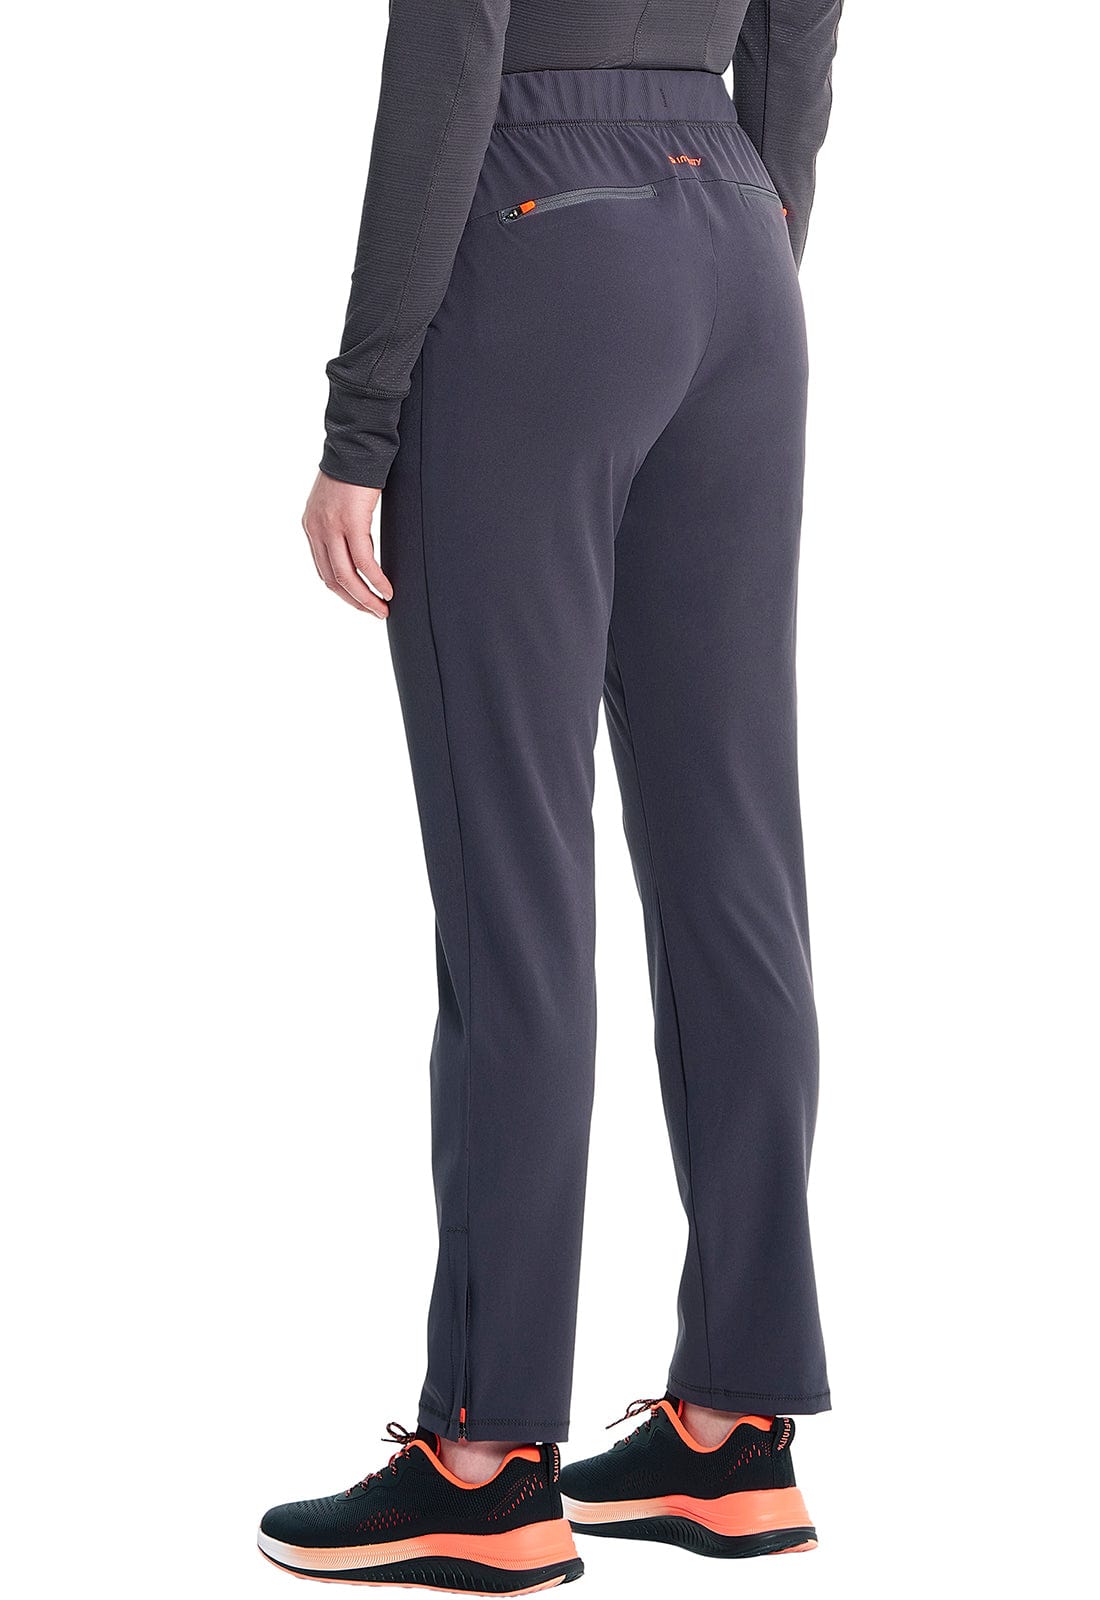 Infinity Infinity GNR8 Infinity GNR8 Tall Mid-rise Tapered Leg Pant IN120AT